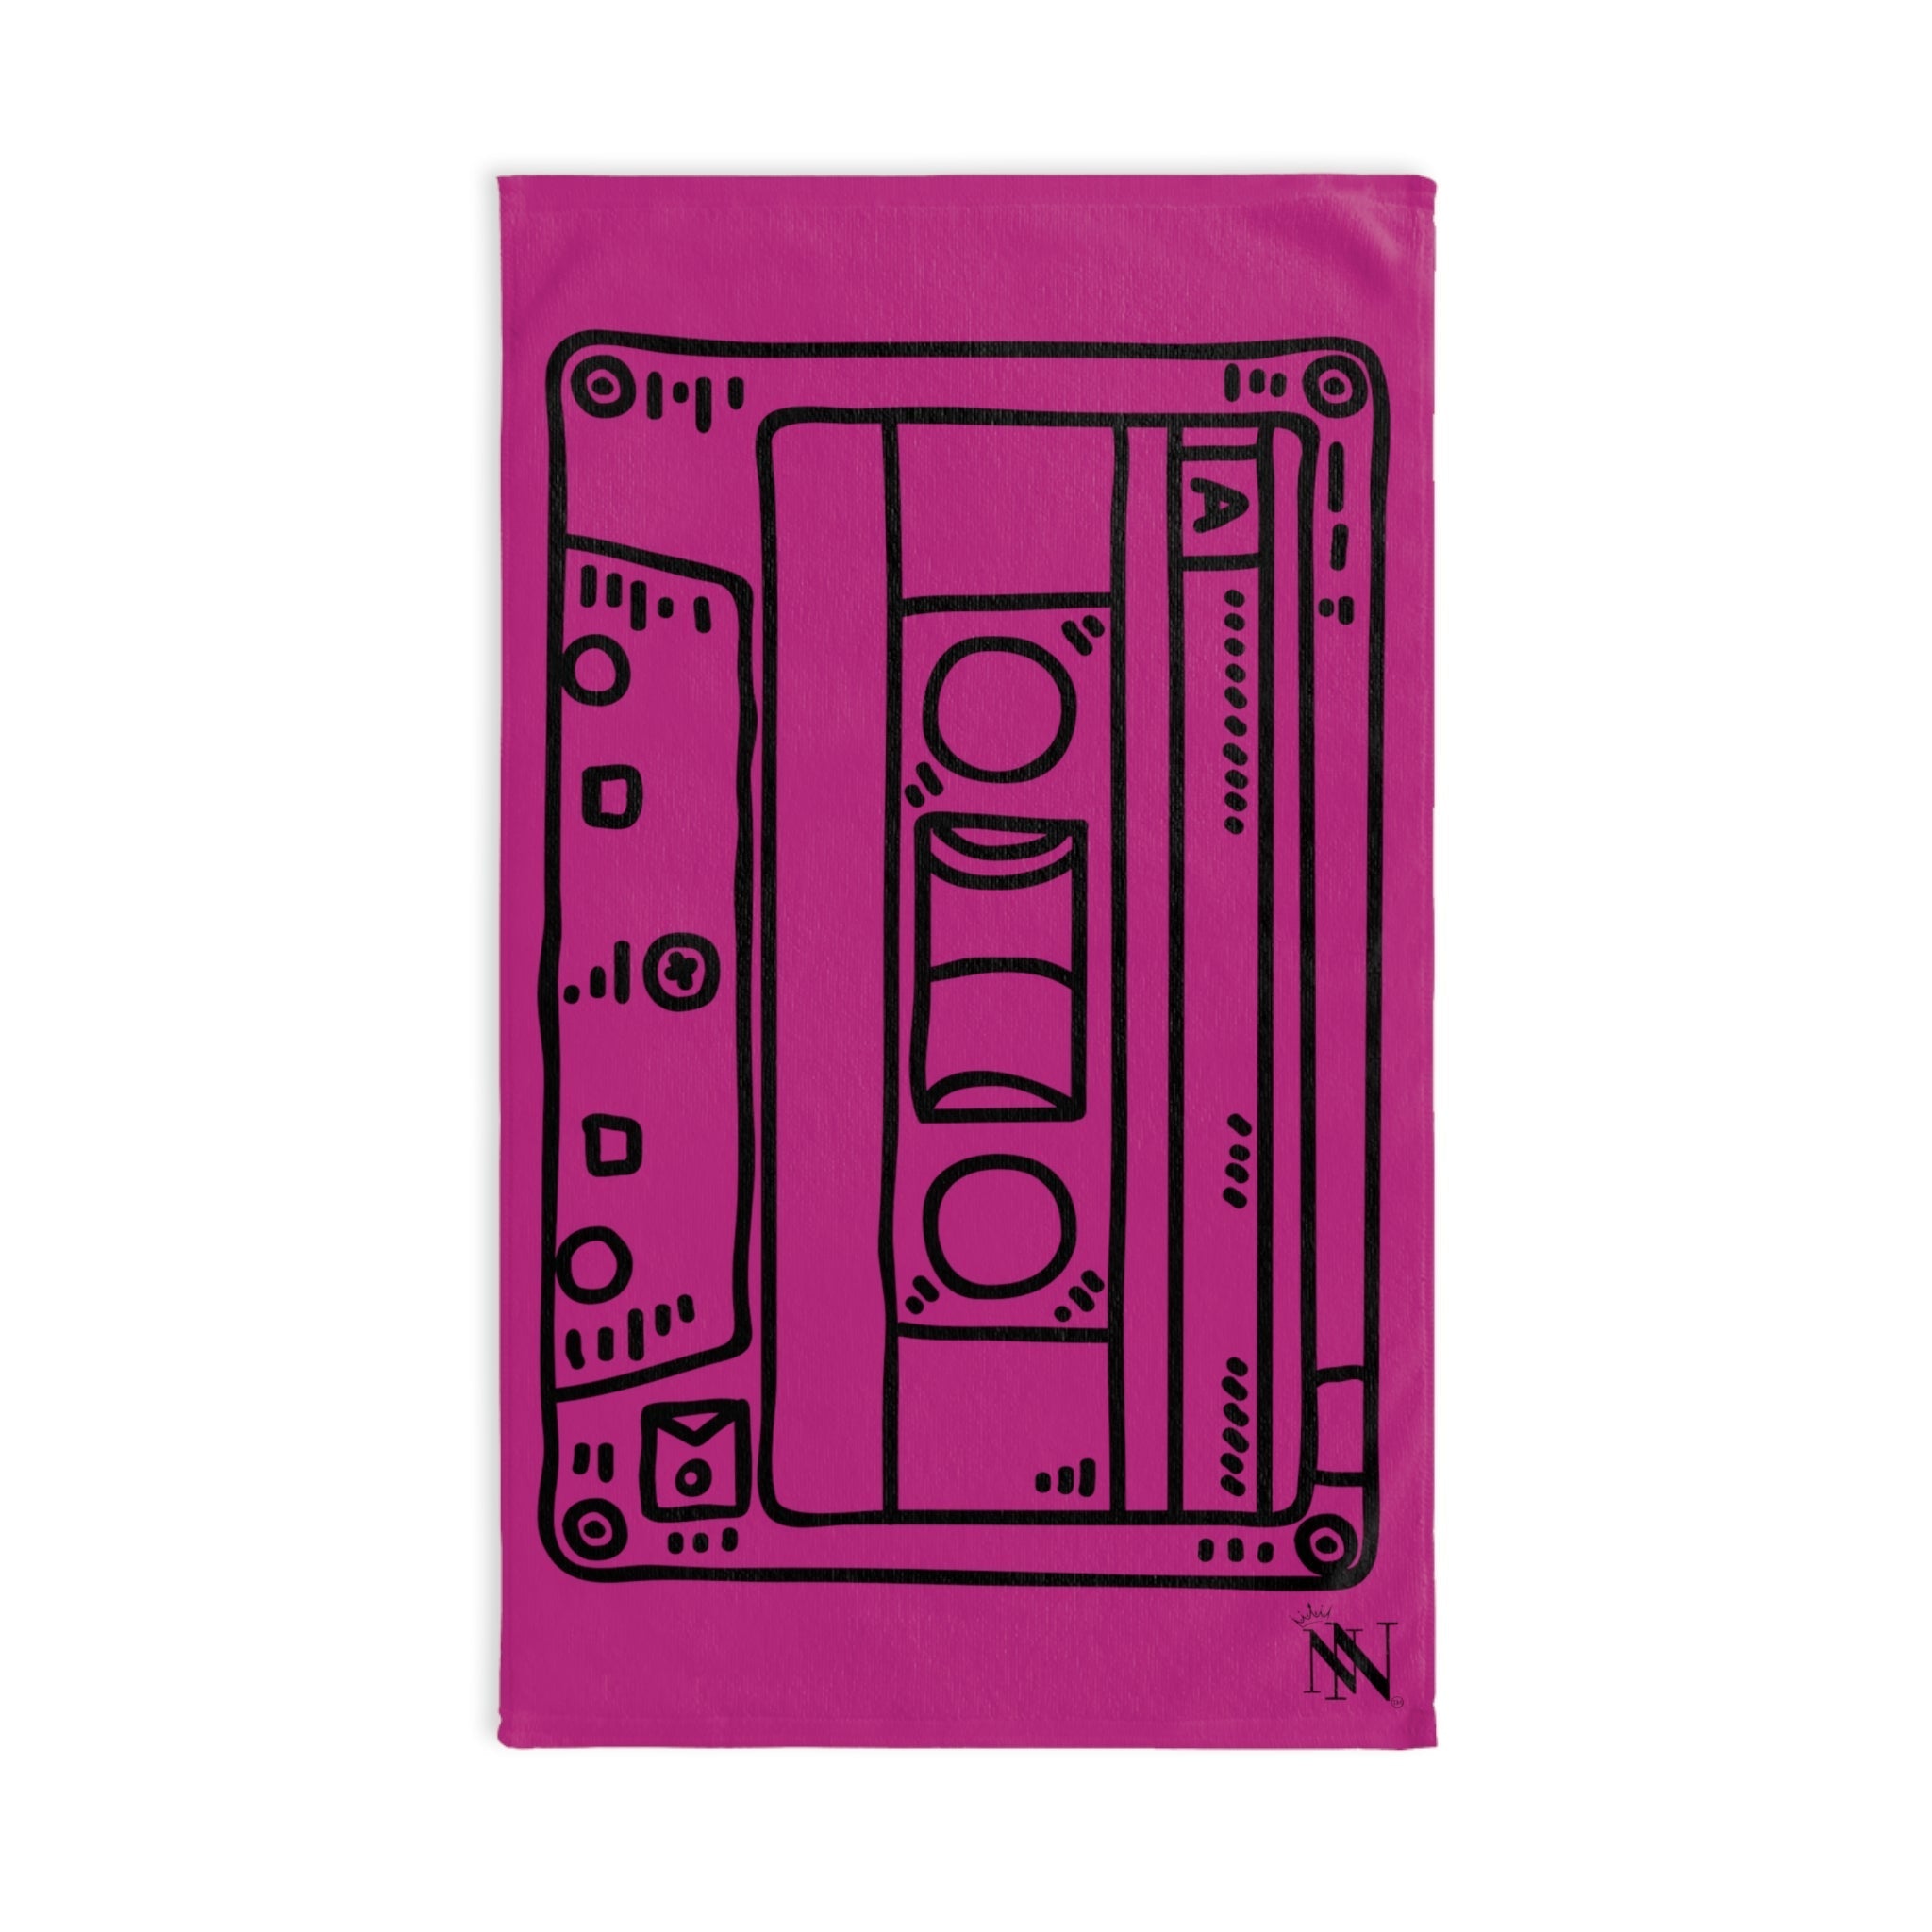 Cassette Black 80s Fuscia | Funny Gifts for Men - Gifts for Him - Birthday Gifts for Men, Him, Husband, Boyfriend, New Couple Gifts, Fathers & Valentines Day Gifts, Hand Towels NECTAR NAPKINS